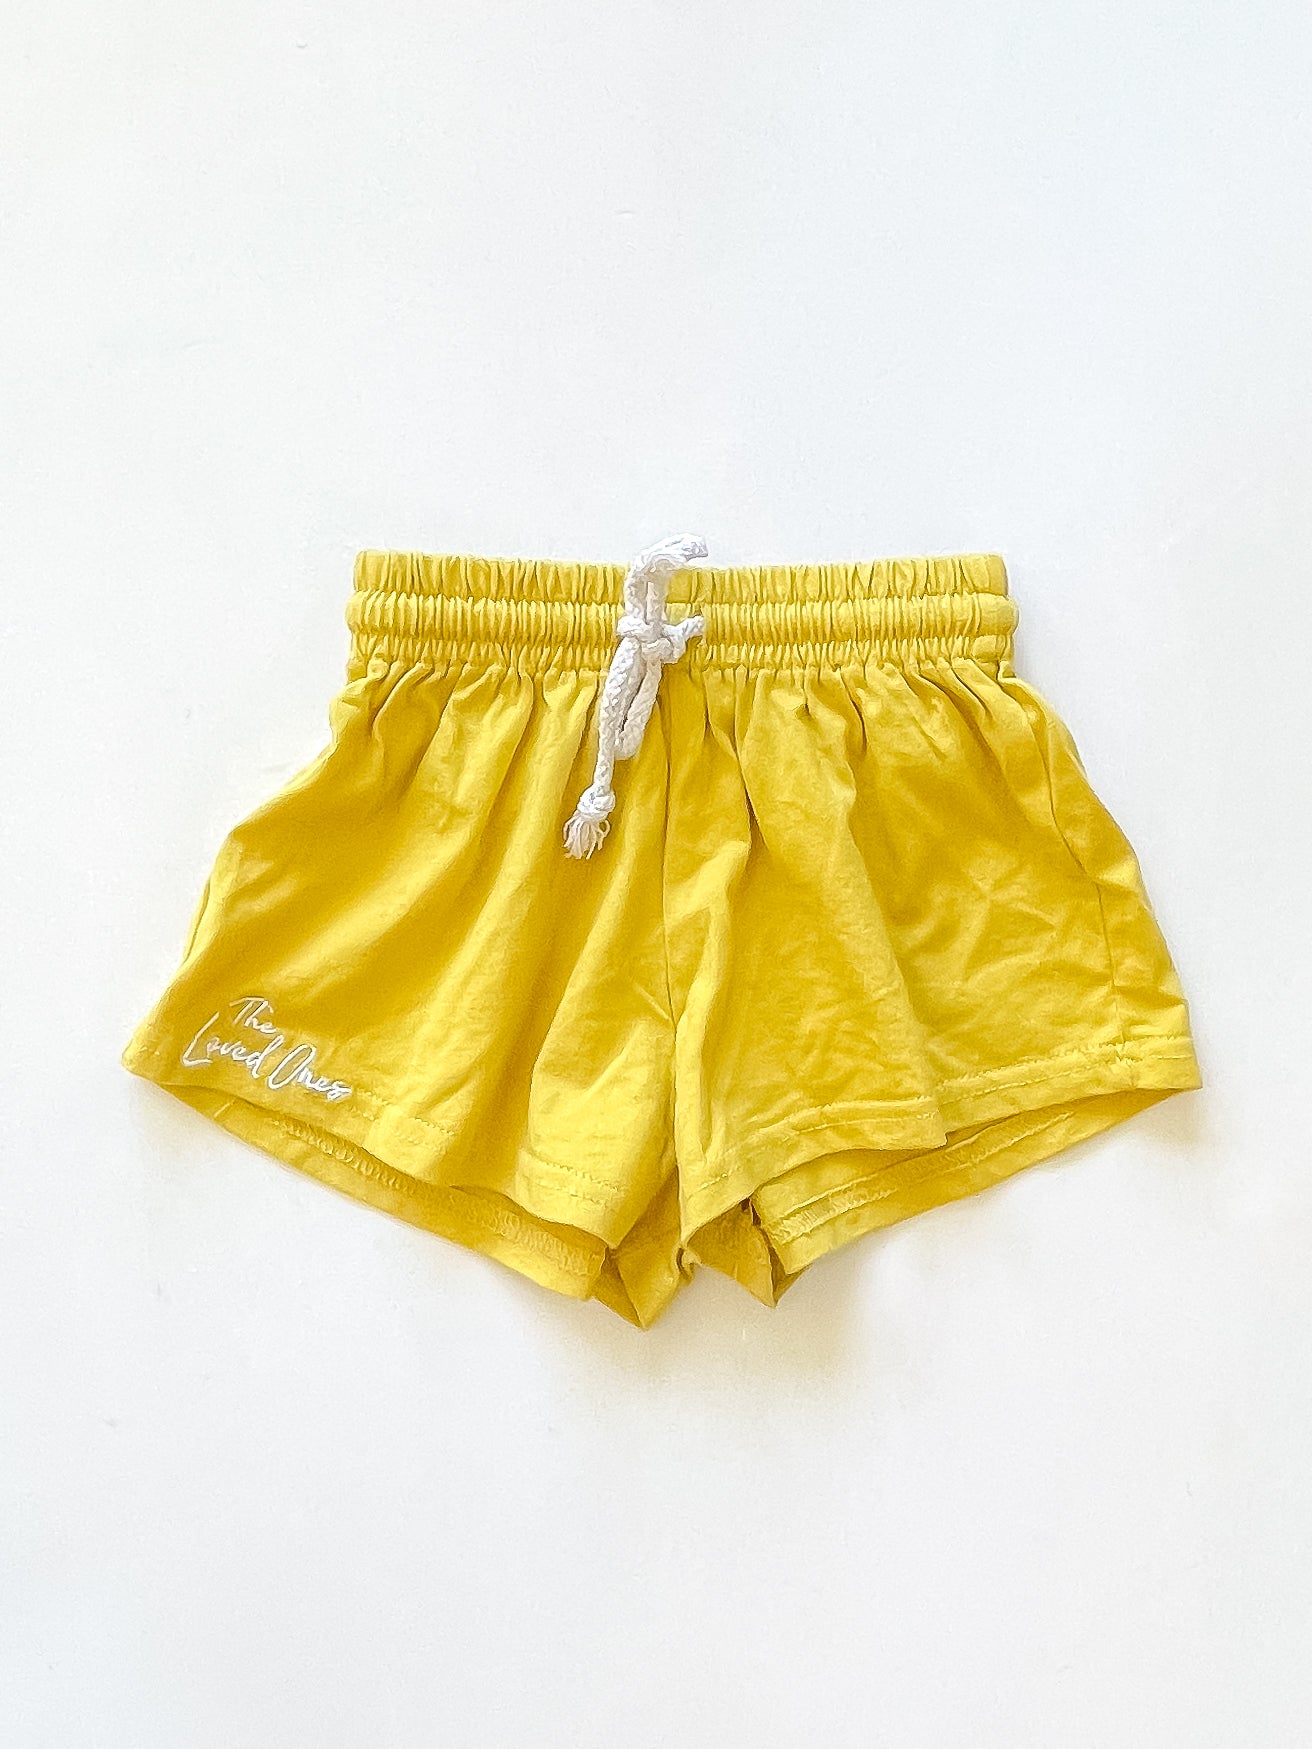 The Loved Ones drawstring shorts (6-12m)